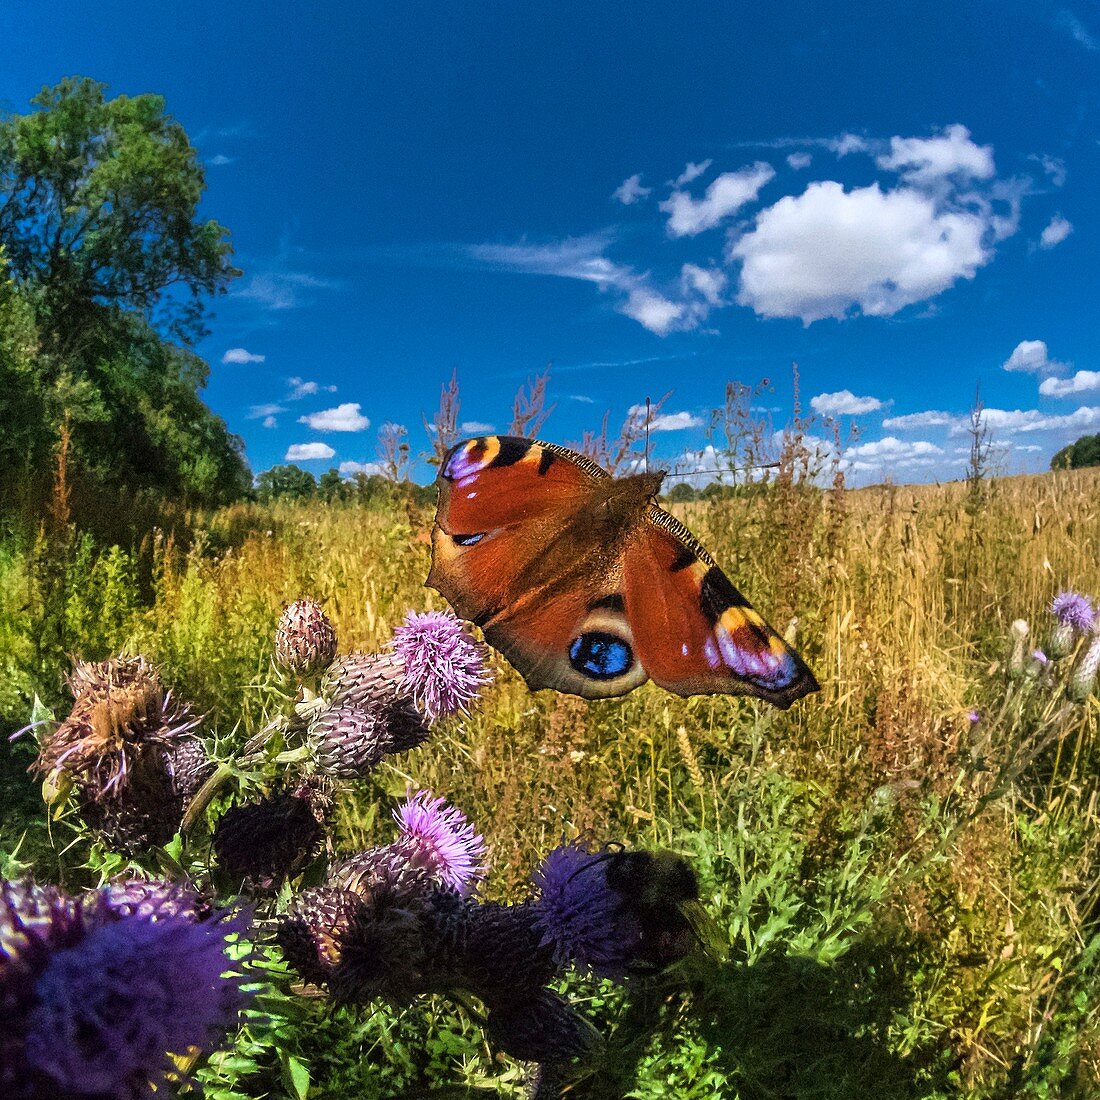 Peacock butterfly, high-speed fish-eye lens image